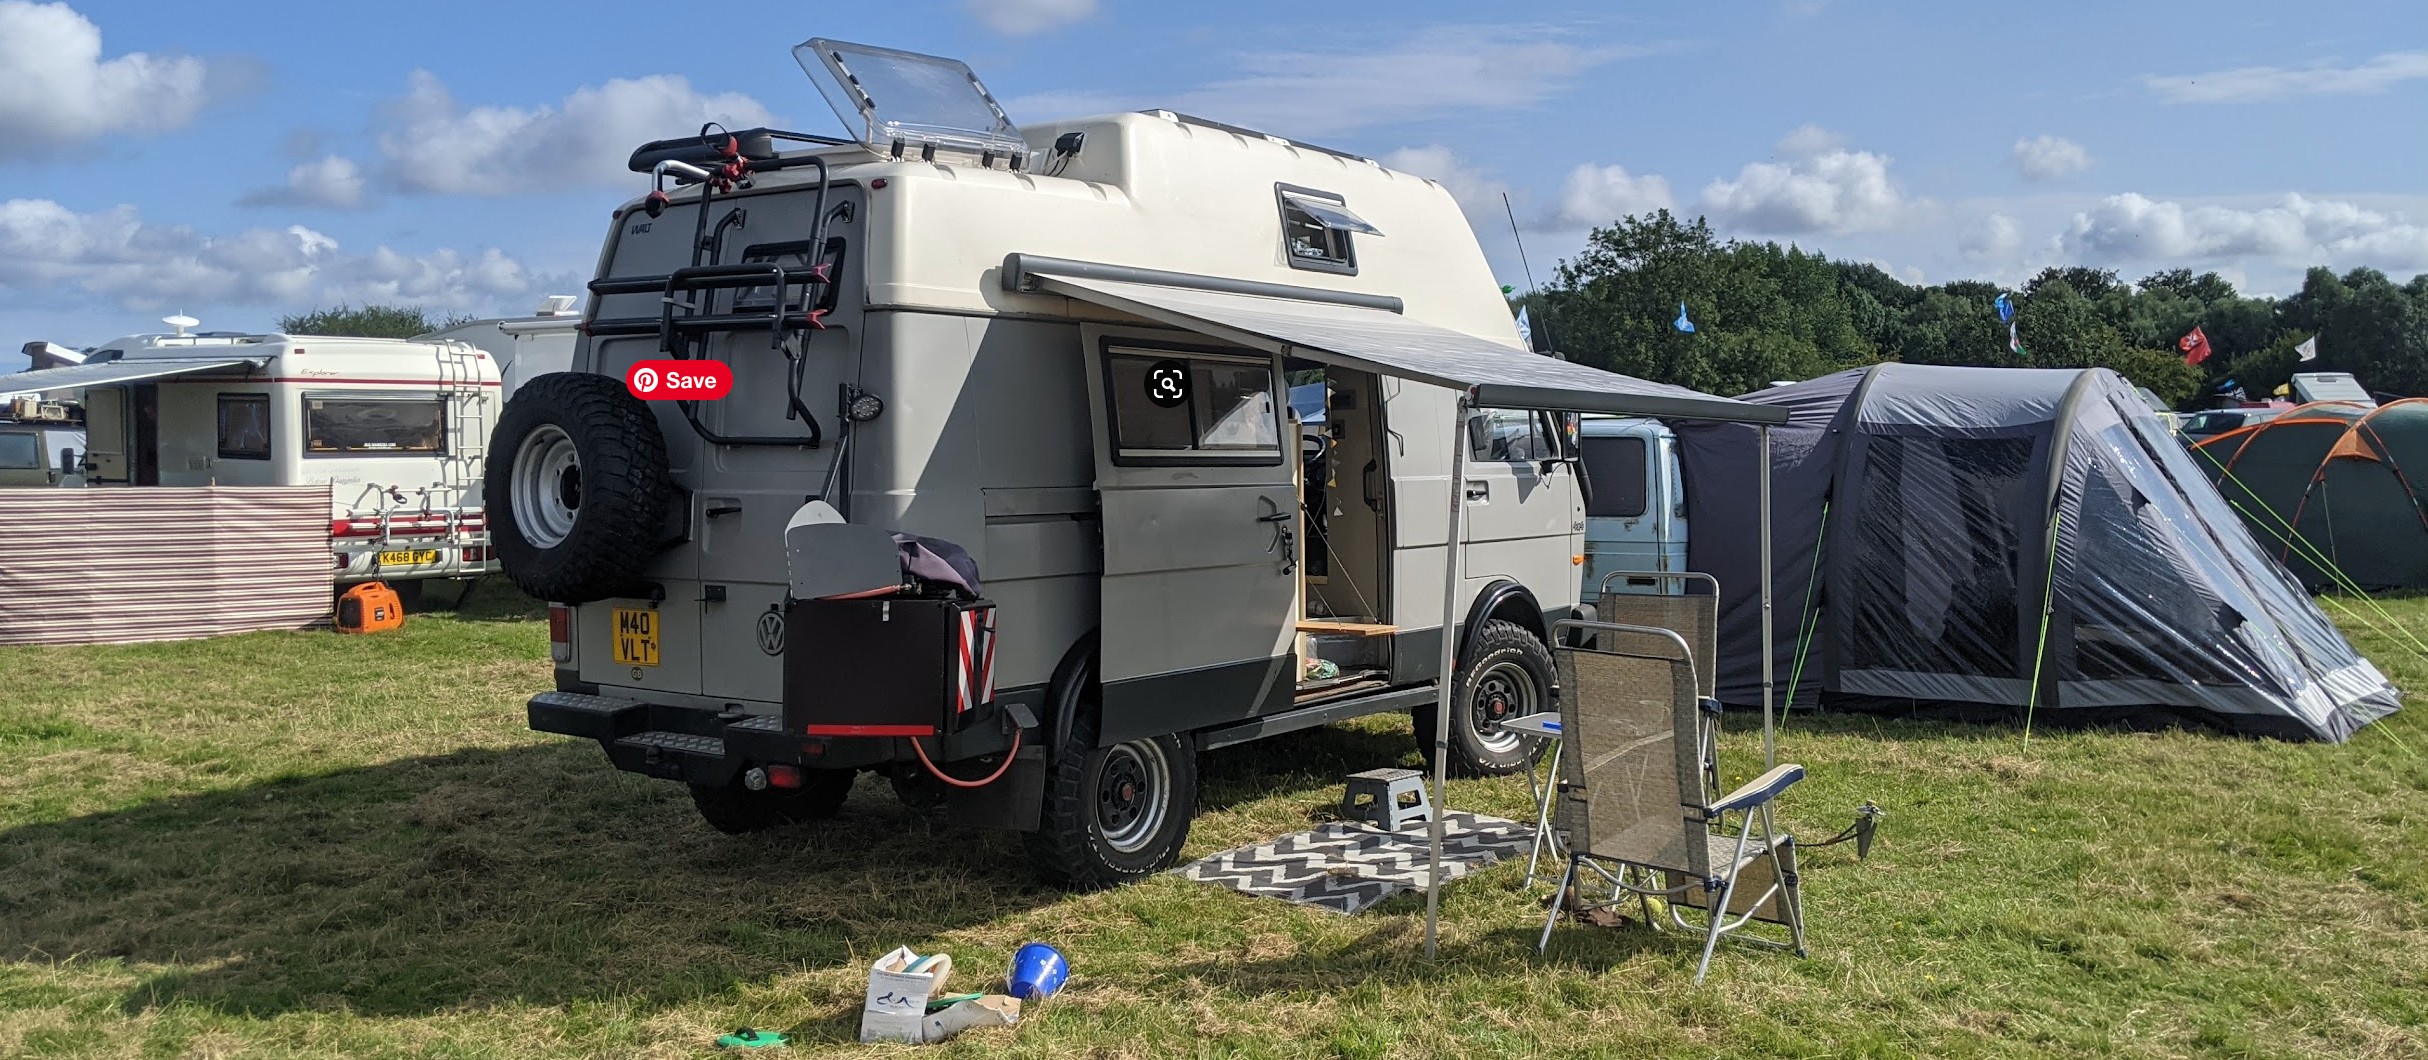 What considerations are there around security in a campervan?